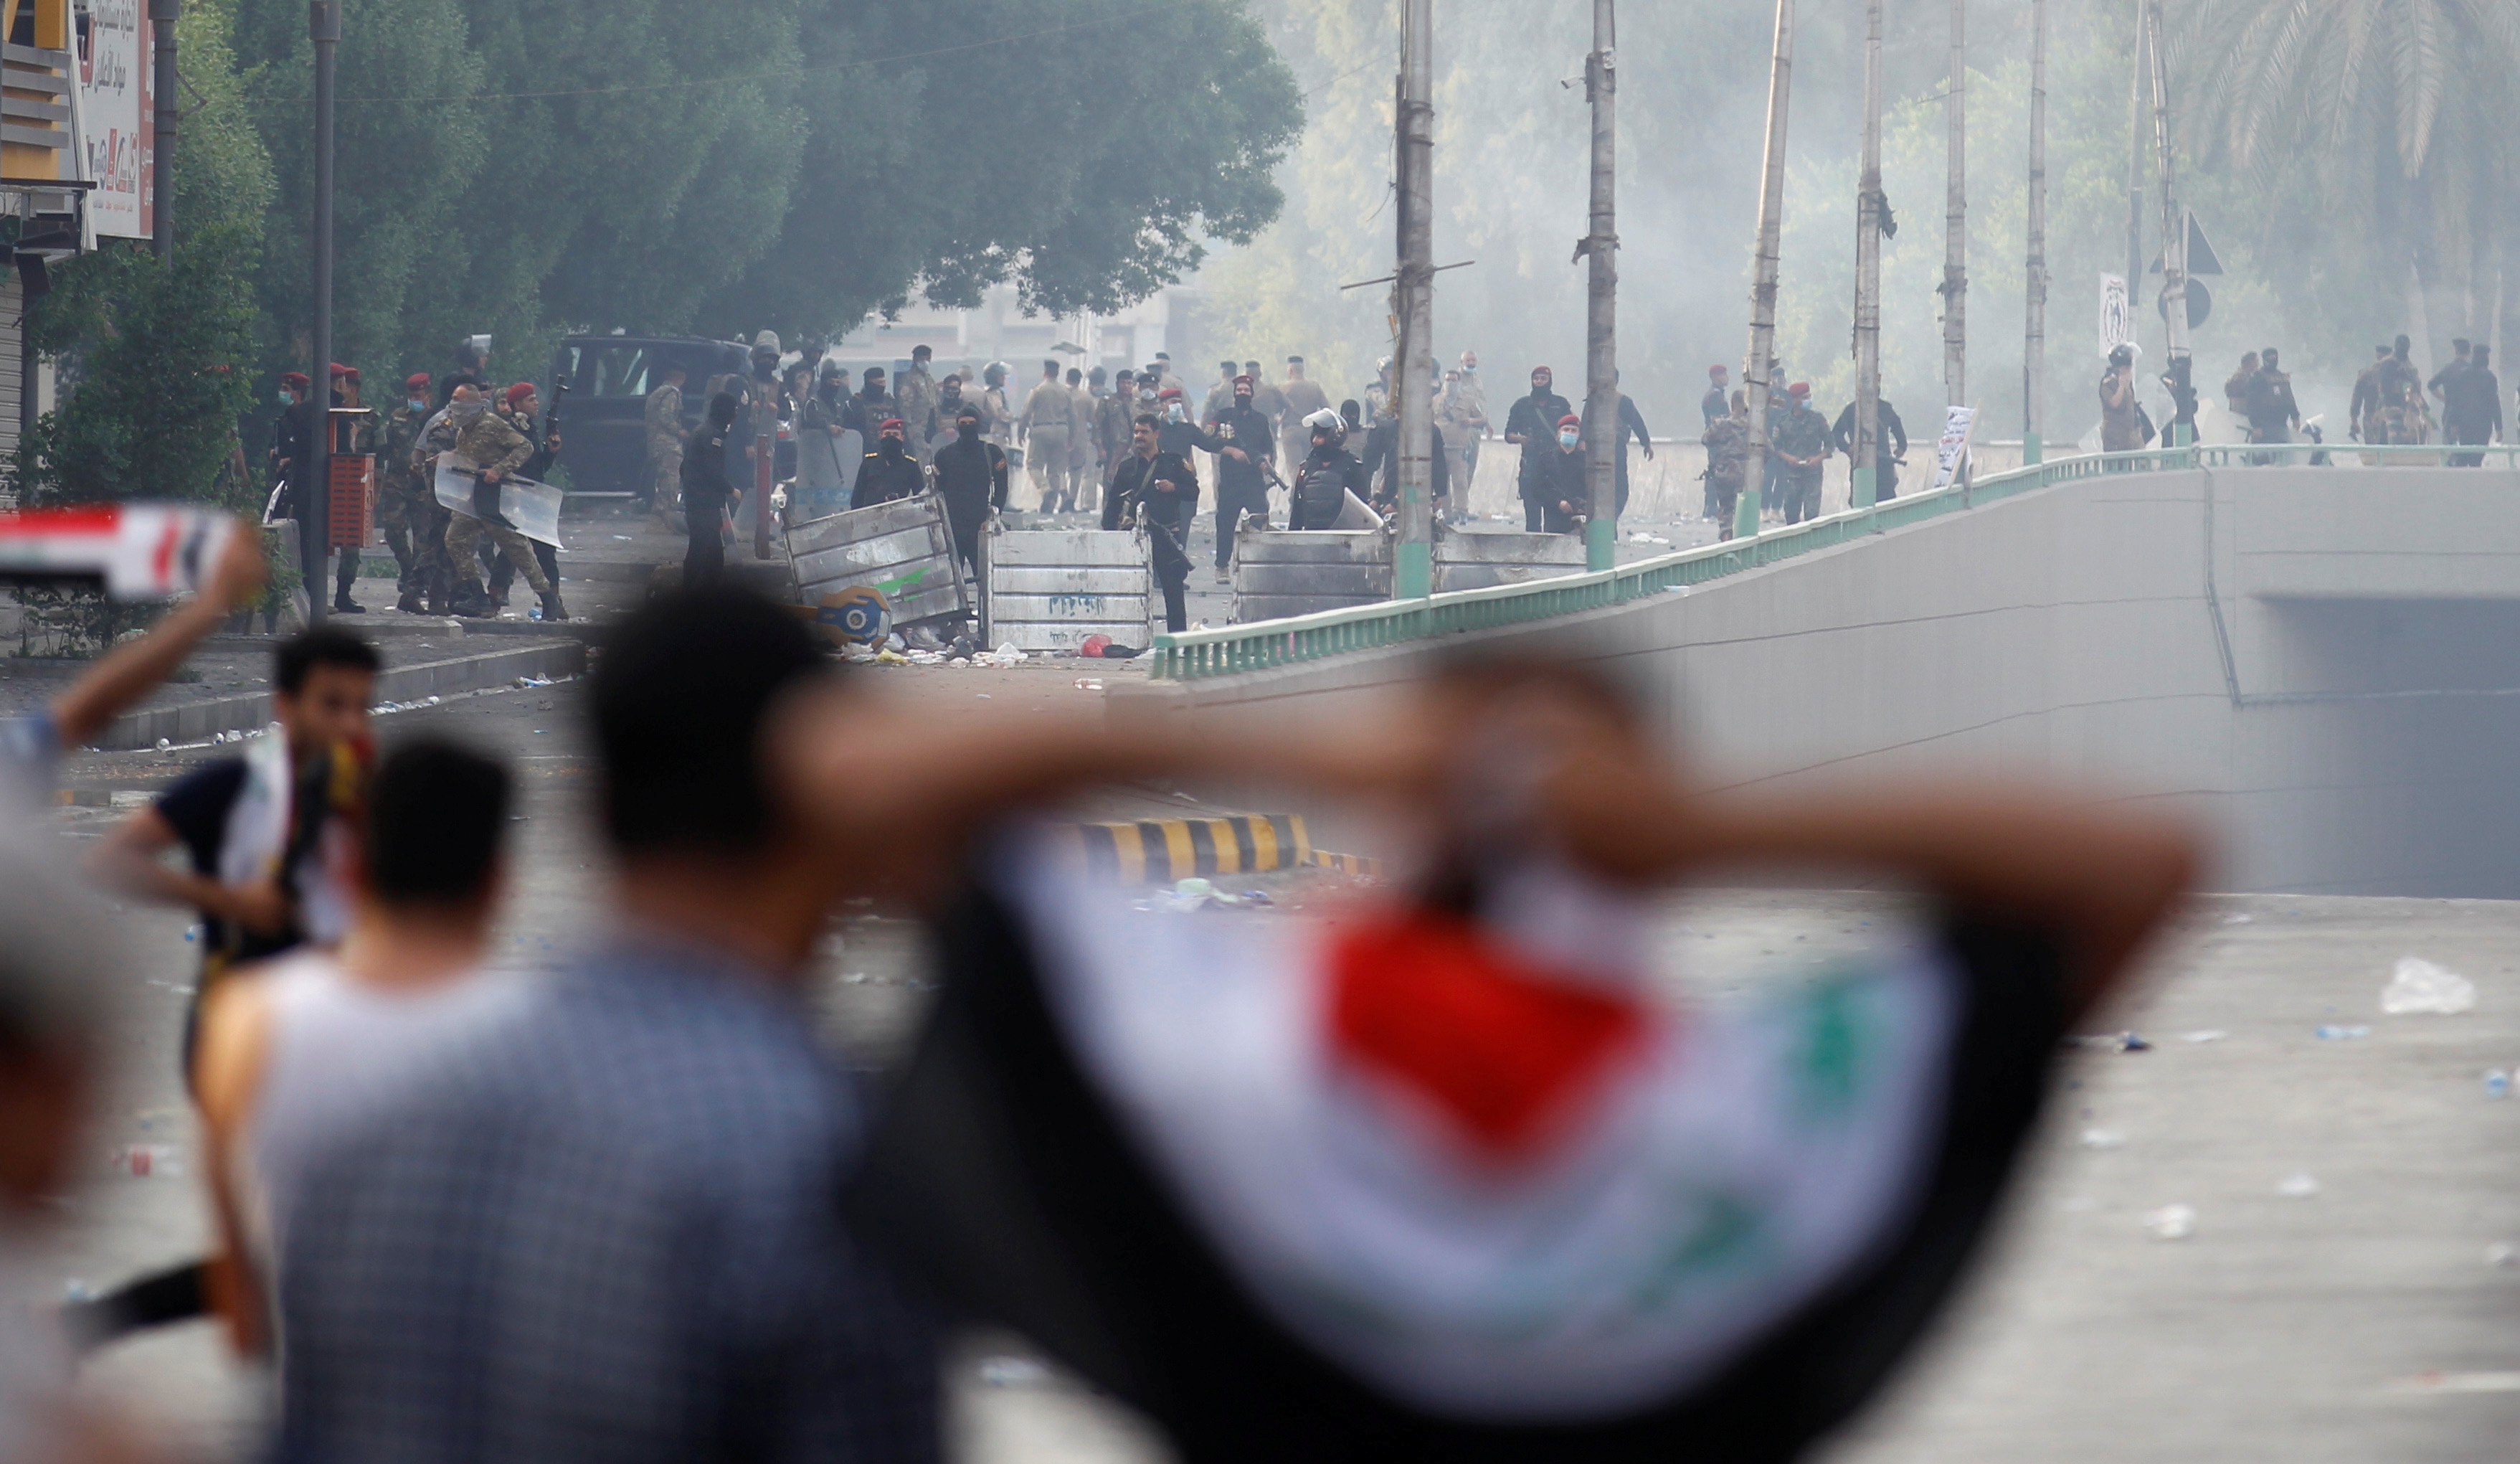  Demonstrators disperse as Iraqi Security forces use tear gas during a protest against government corruption amid dissatisfaction at lack of jobs and services at Tahrir square in Baghdad, Iraq October 1, 2019